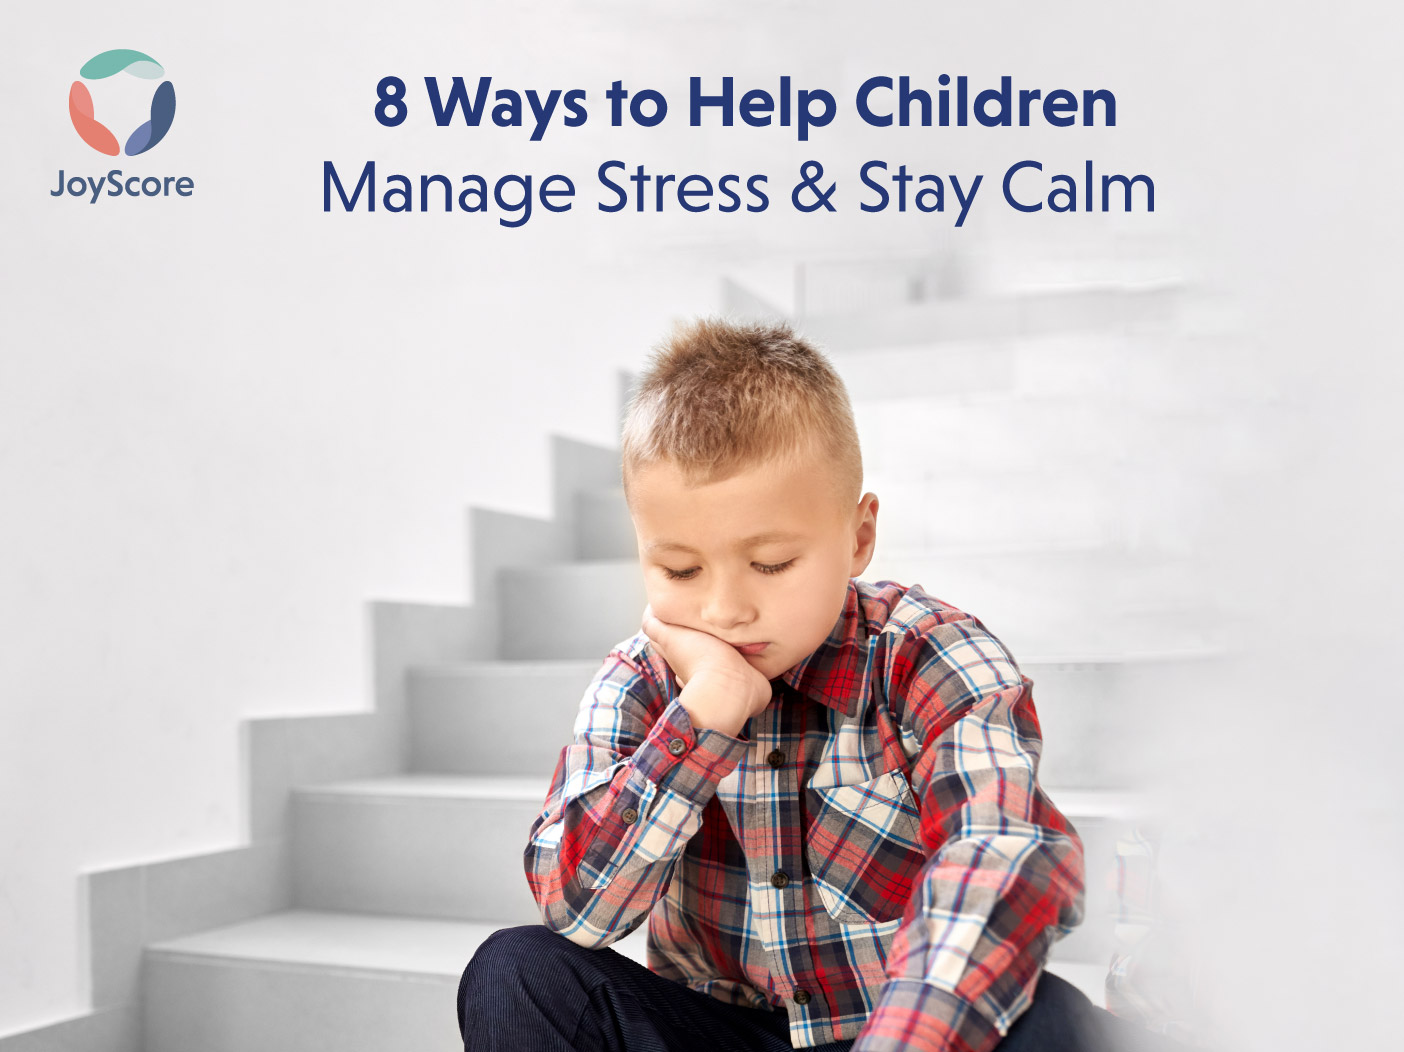 How to Help Children Manage Stress